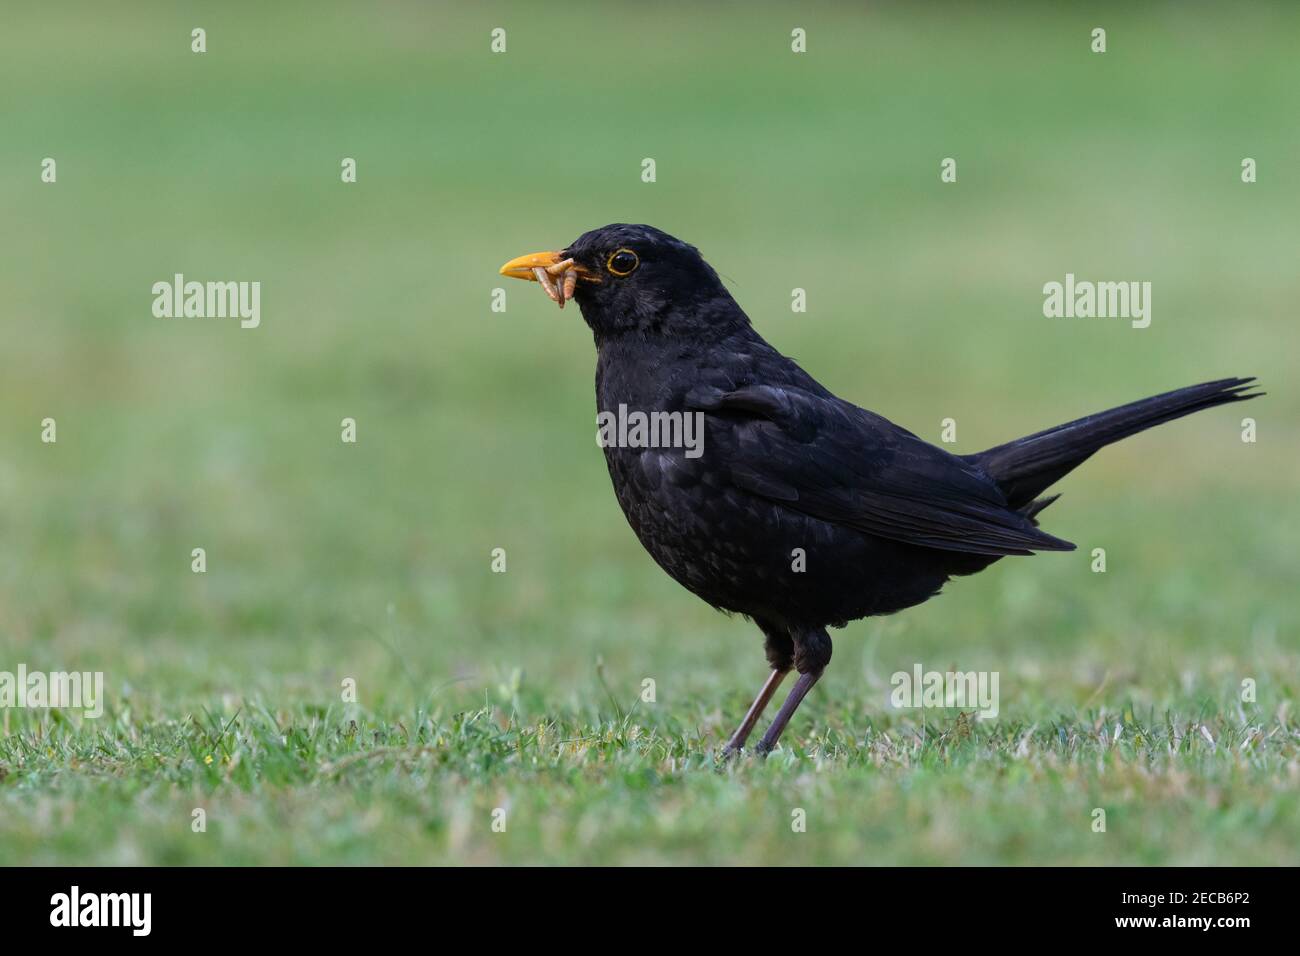 Male Blackbird [ Turdus merula ] on lawn with mealworms in its beak and   very shallow depth of field Stock Photo